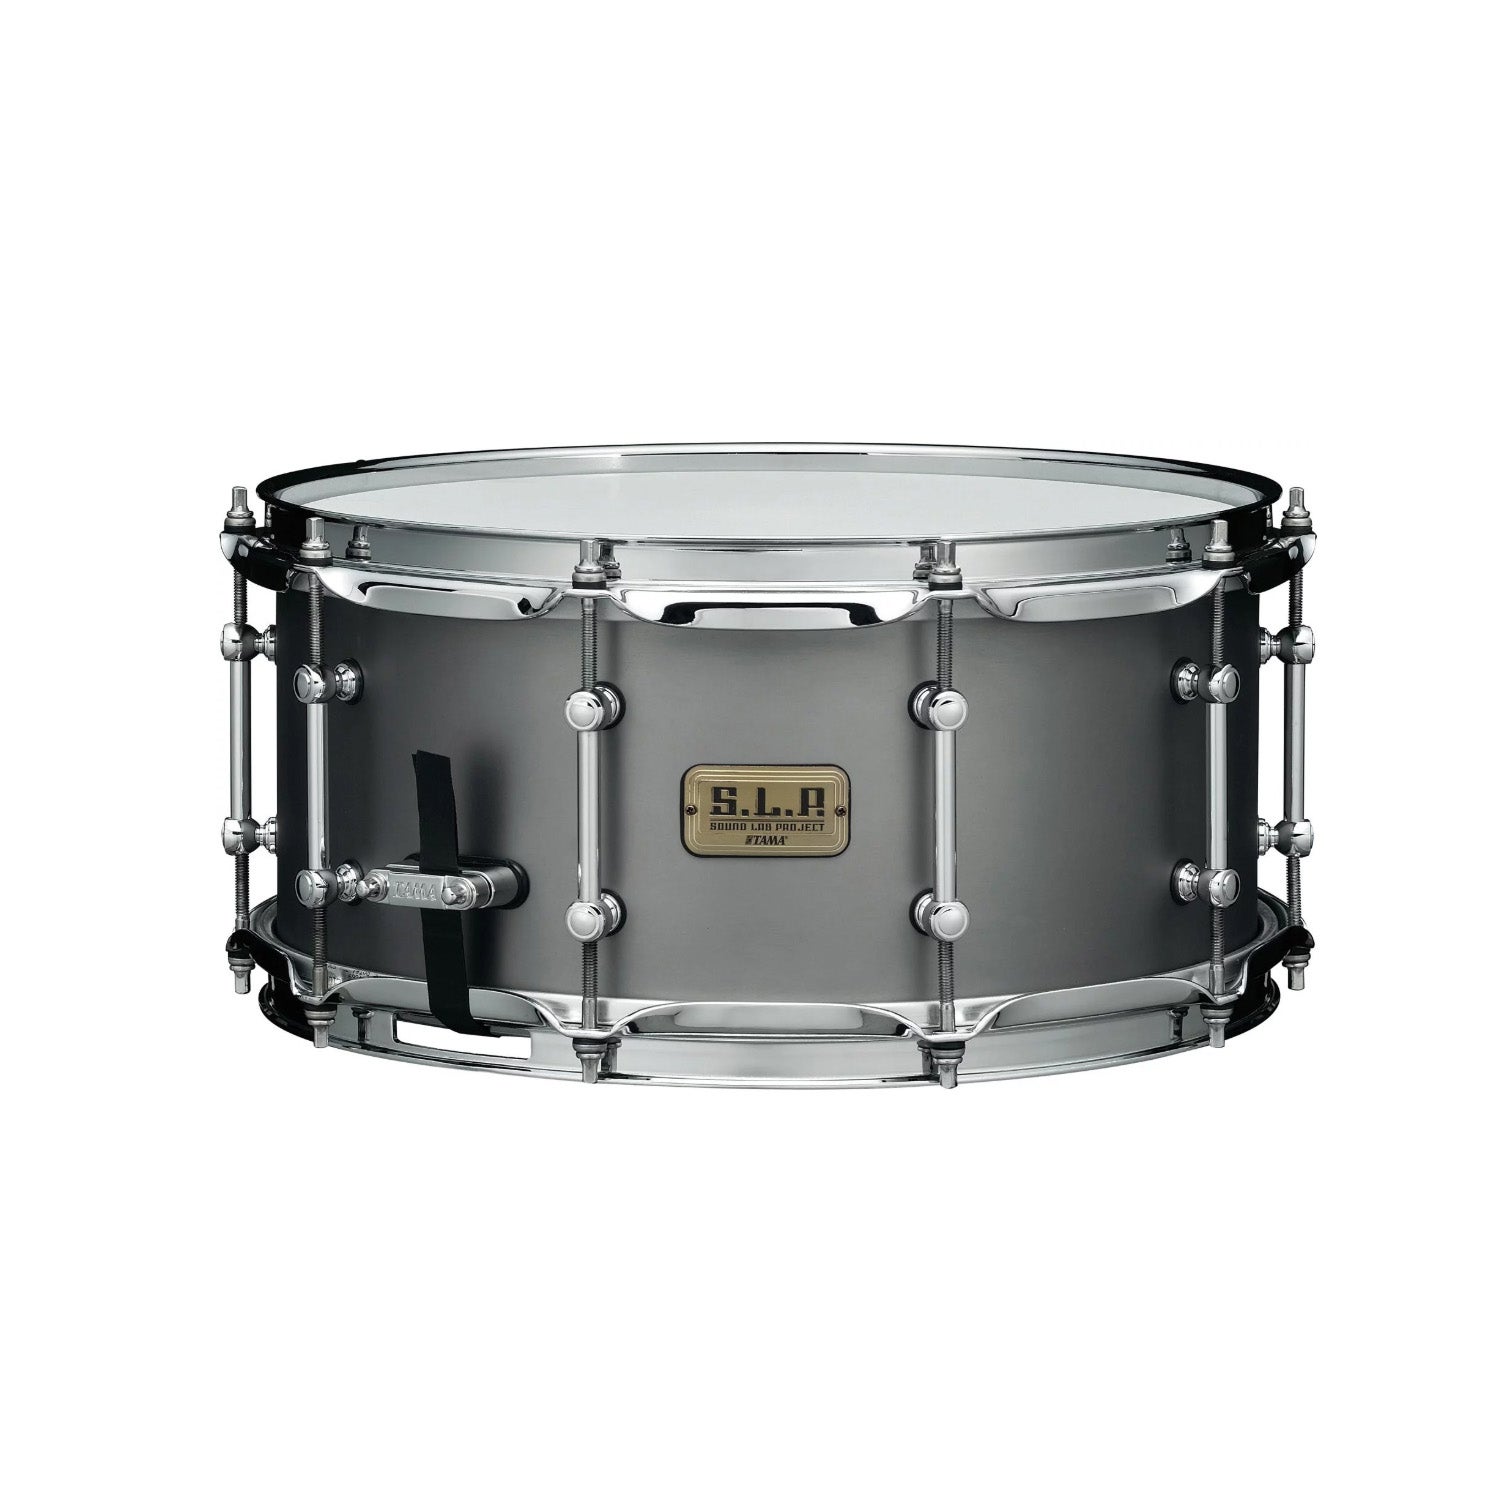 Tama Lss1465 14x6.5 S.l.p. Sonic Stainless Steel Snare Drum 